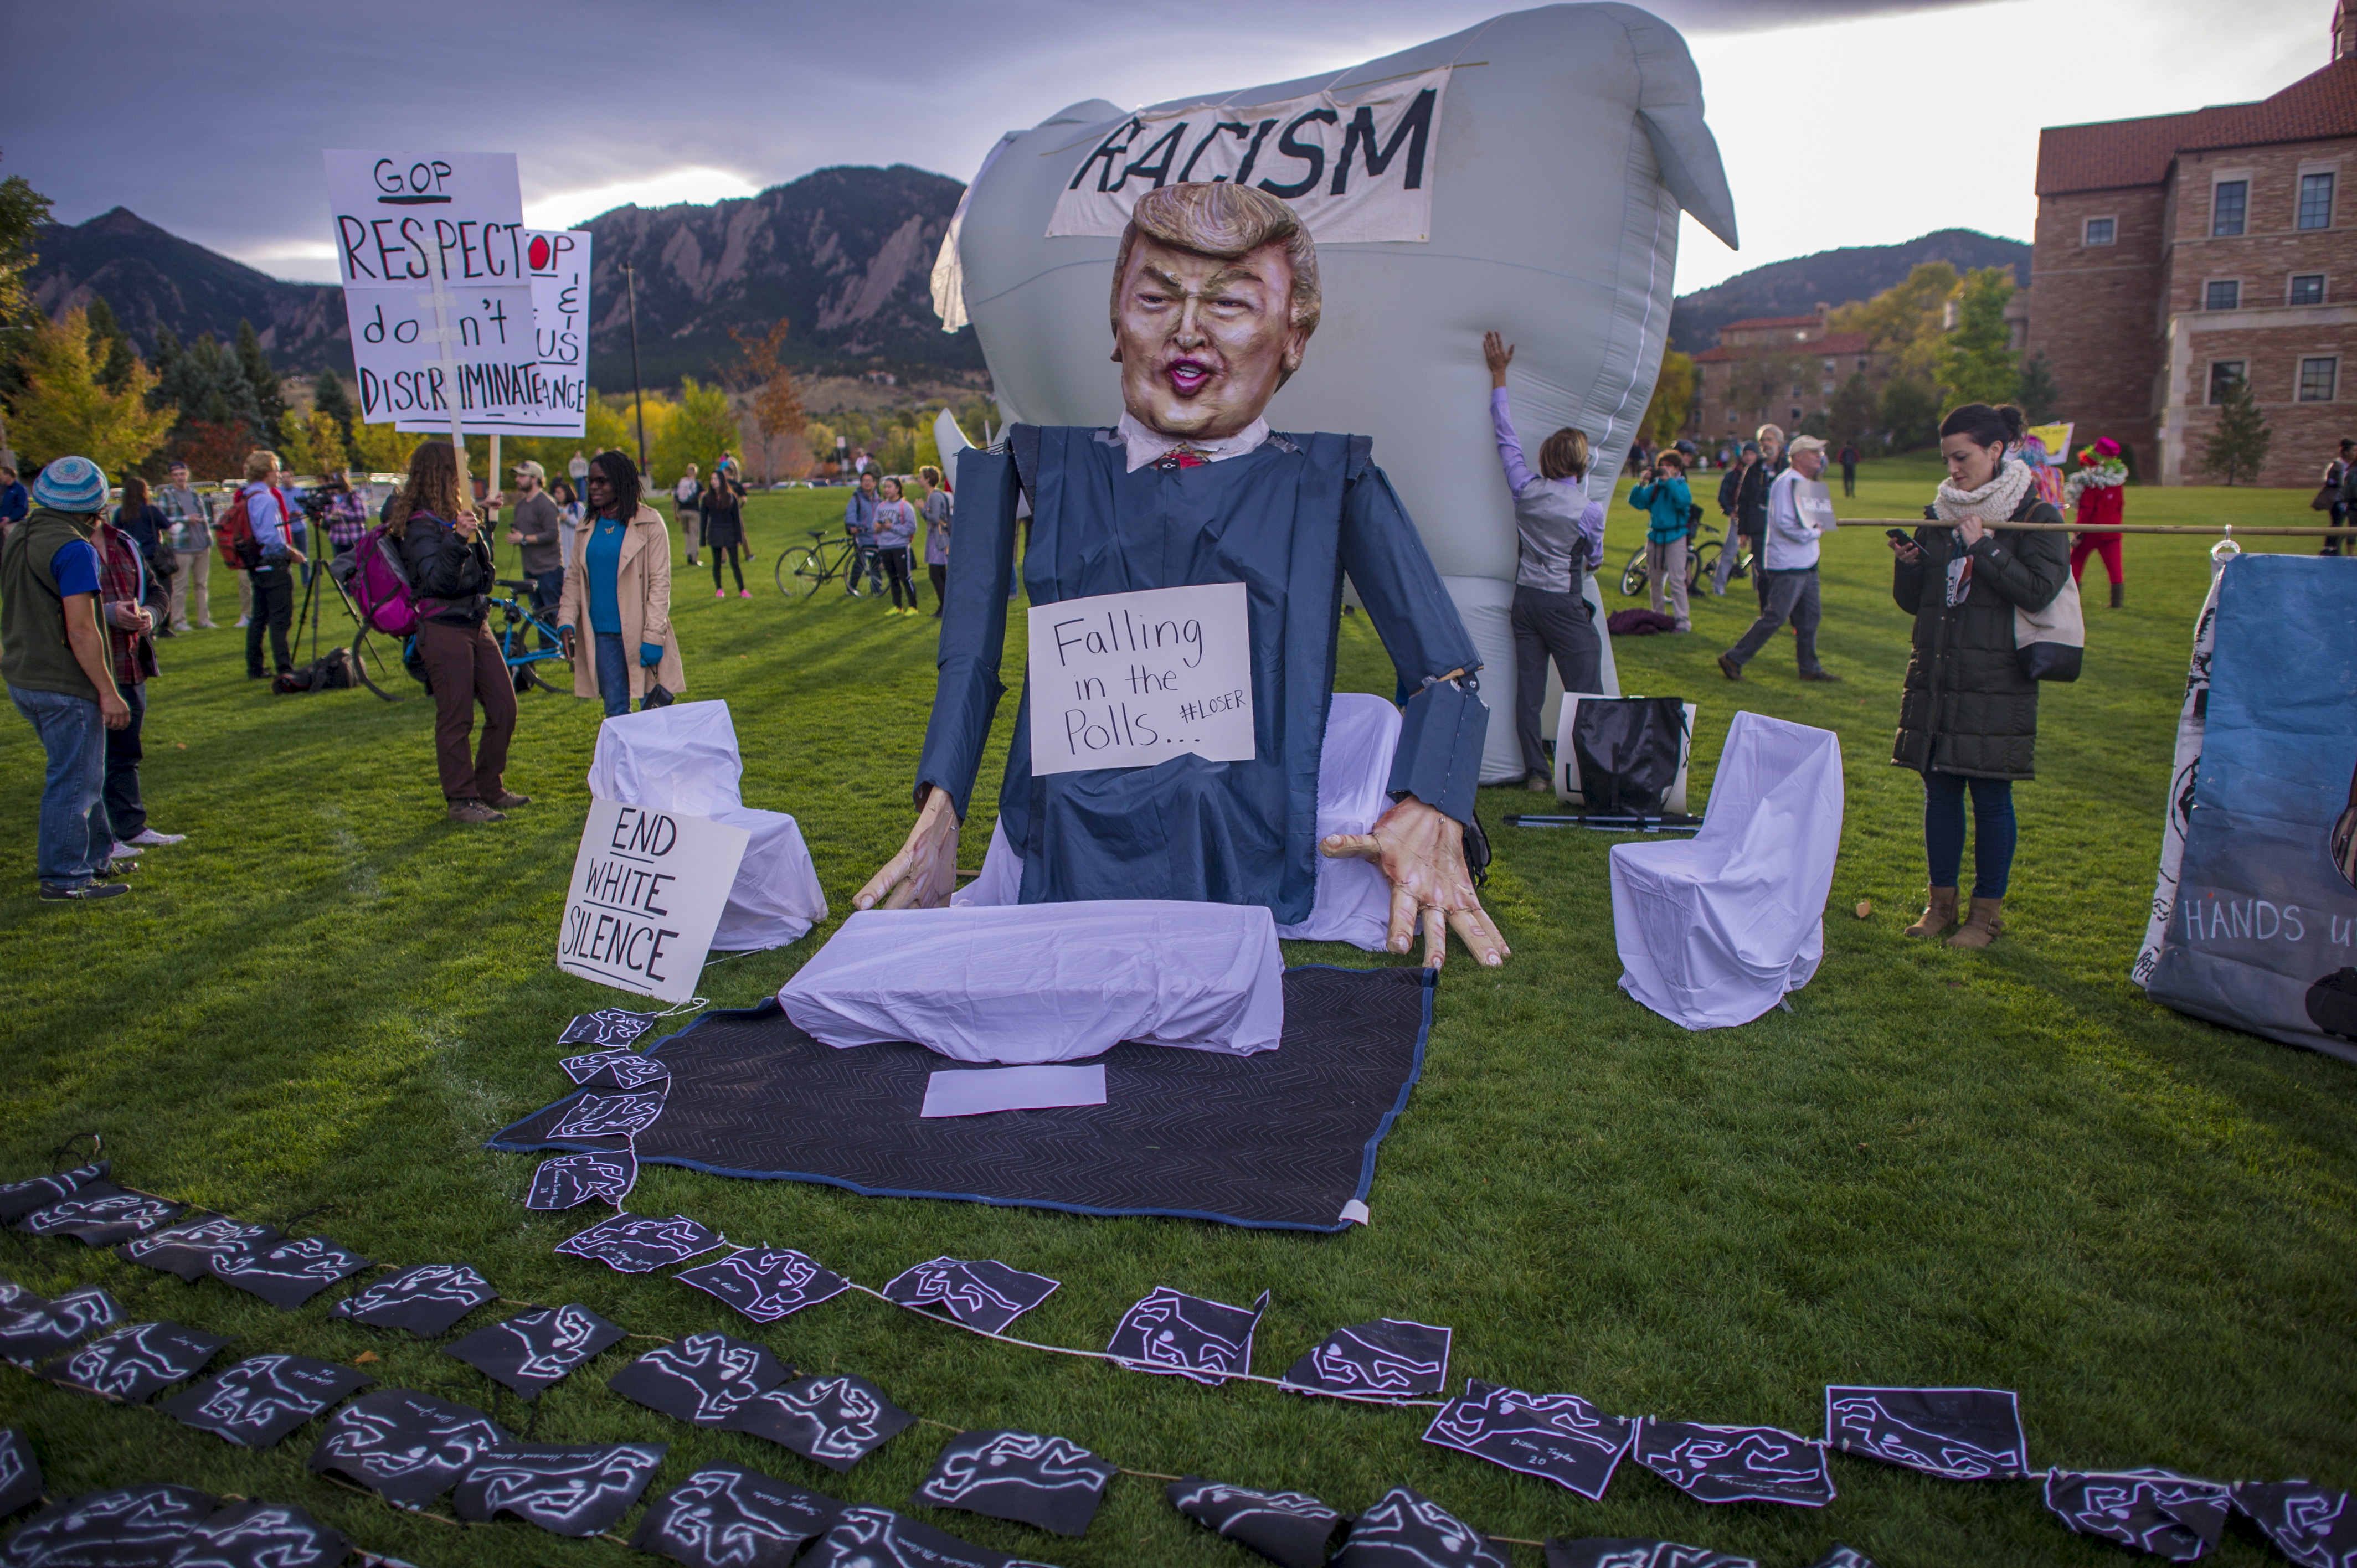 Students and protesters gather at the "Free Speech Zone" located at the University of Colorado's Business Field as candidates gather across the street for a forum held by CNBC before the U.S. Republican presidential candidates debate in Boulder, Colorado, October 28, 2015. REUTERS/Evan Semon